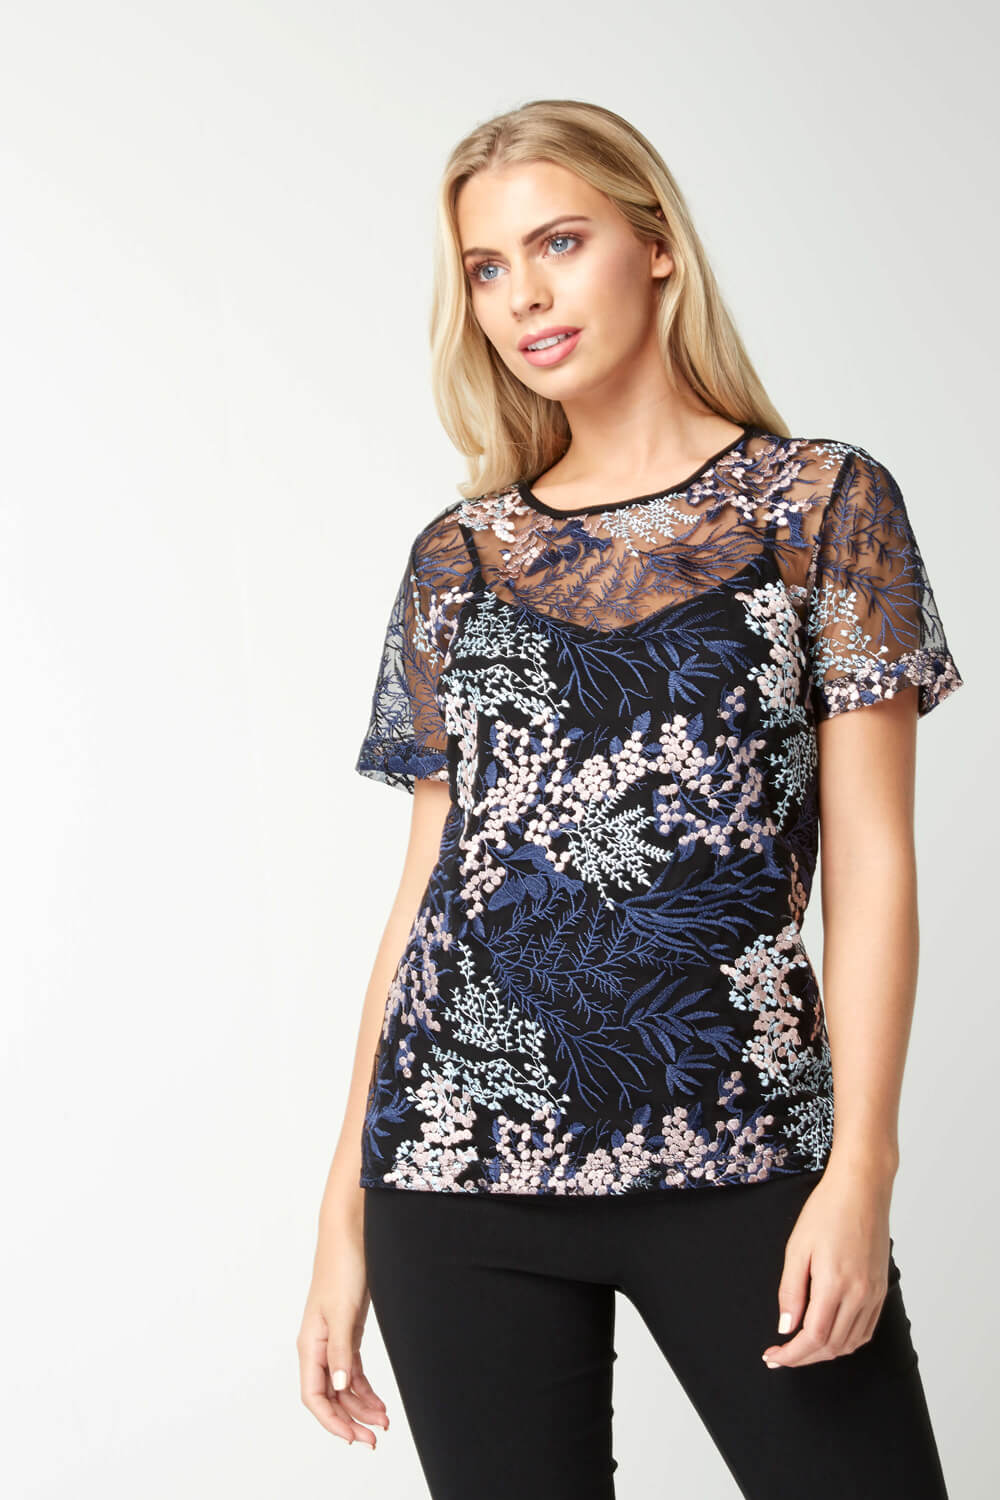 Black Mesh Floral Embroidered Tee, Image 2 of 5